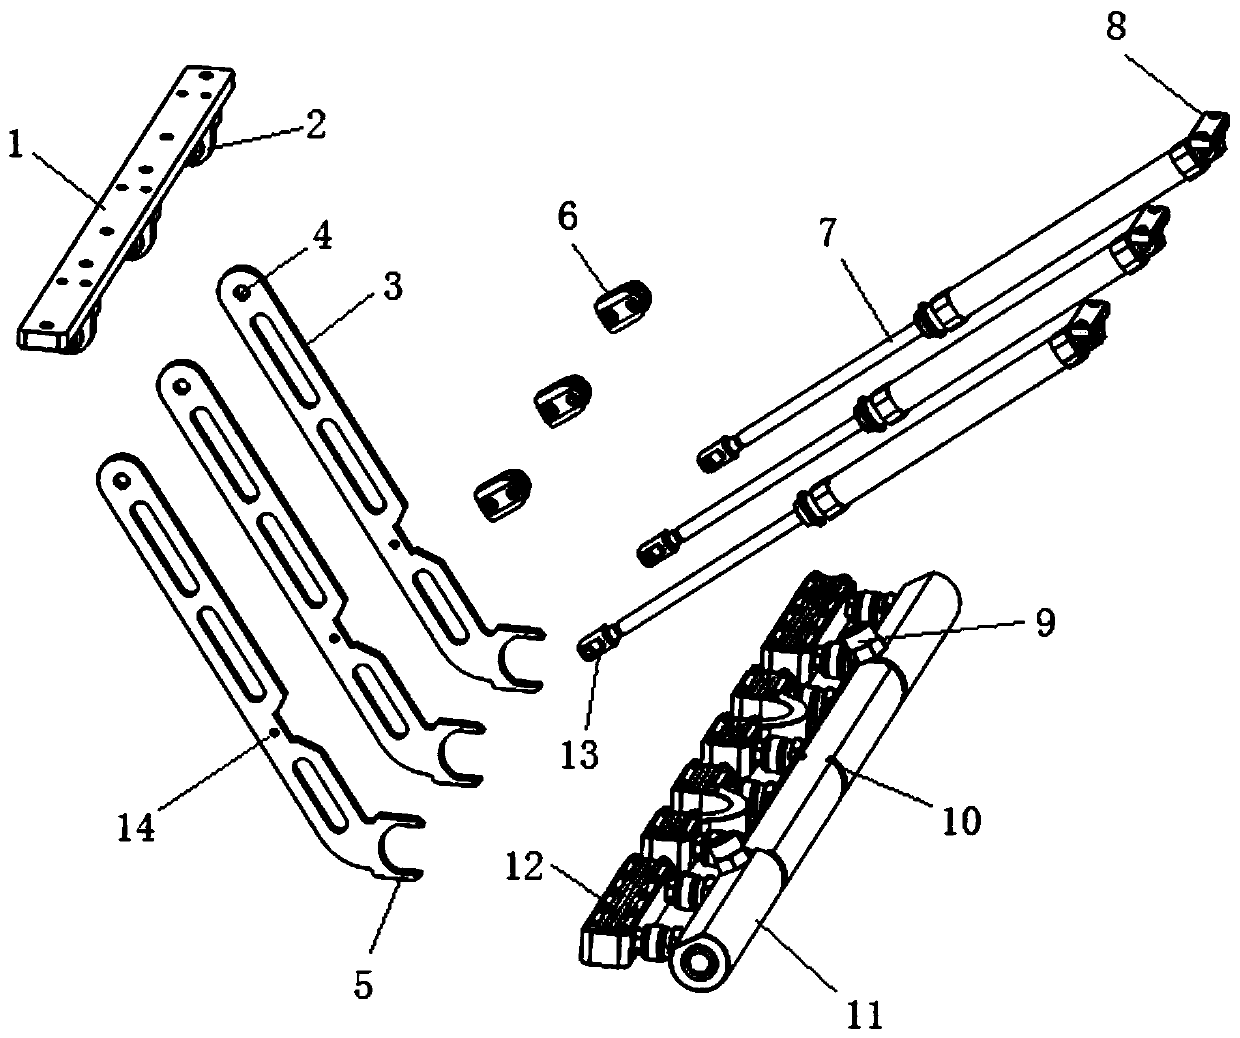 Follower cooling structure for bilateral mechanical arm